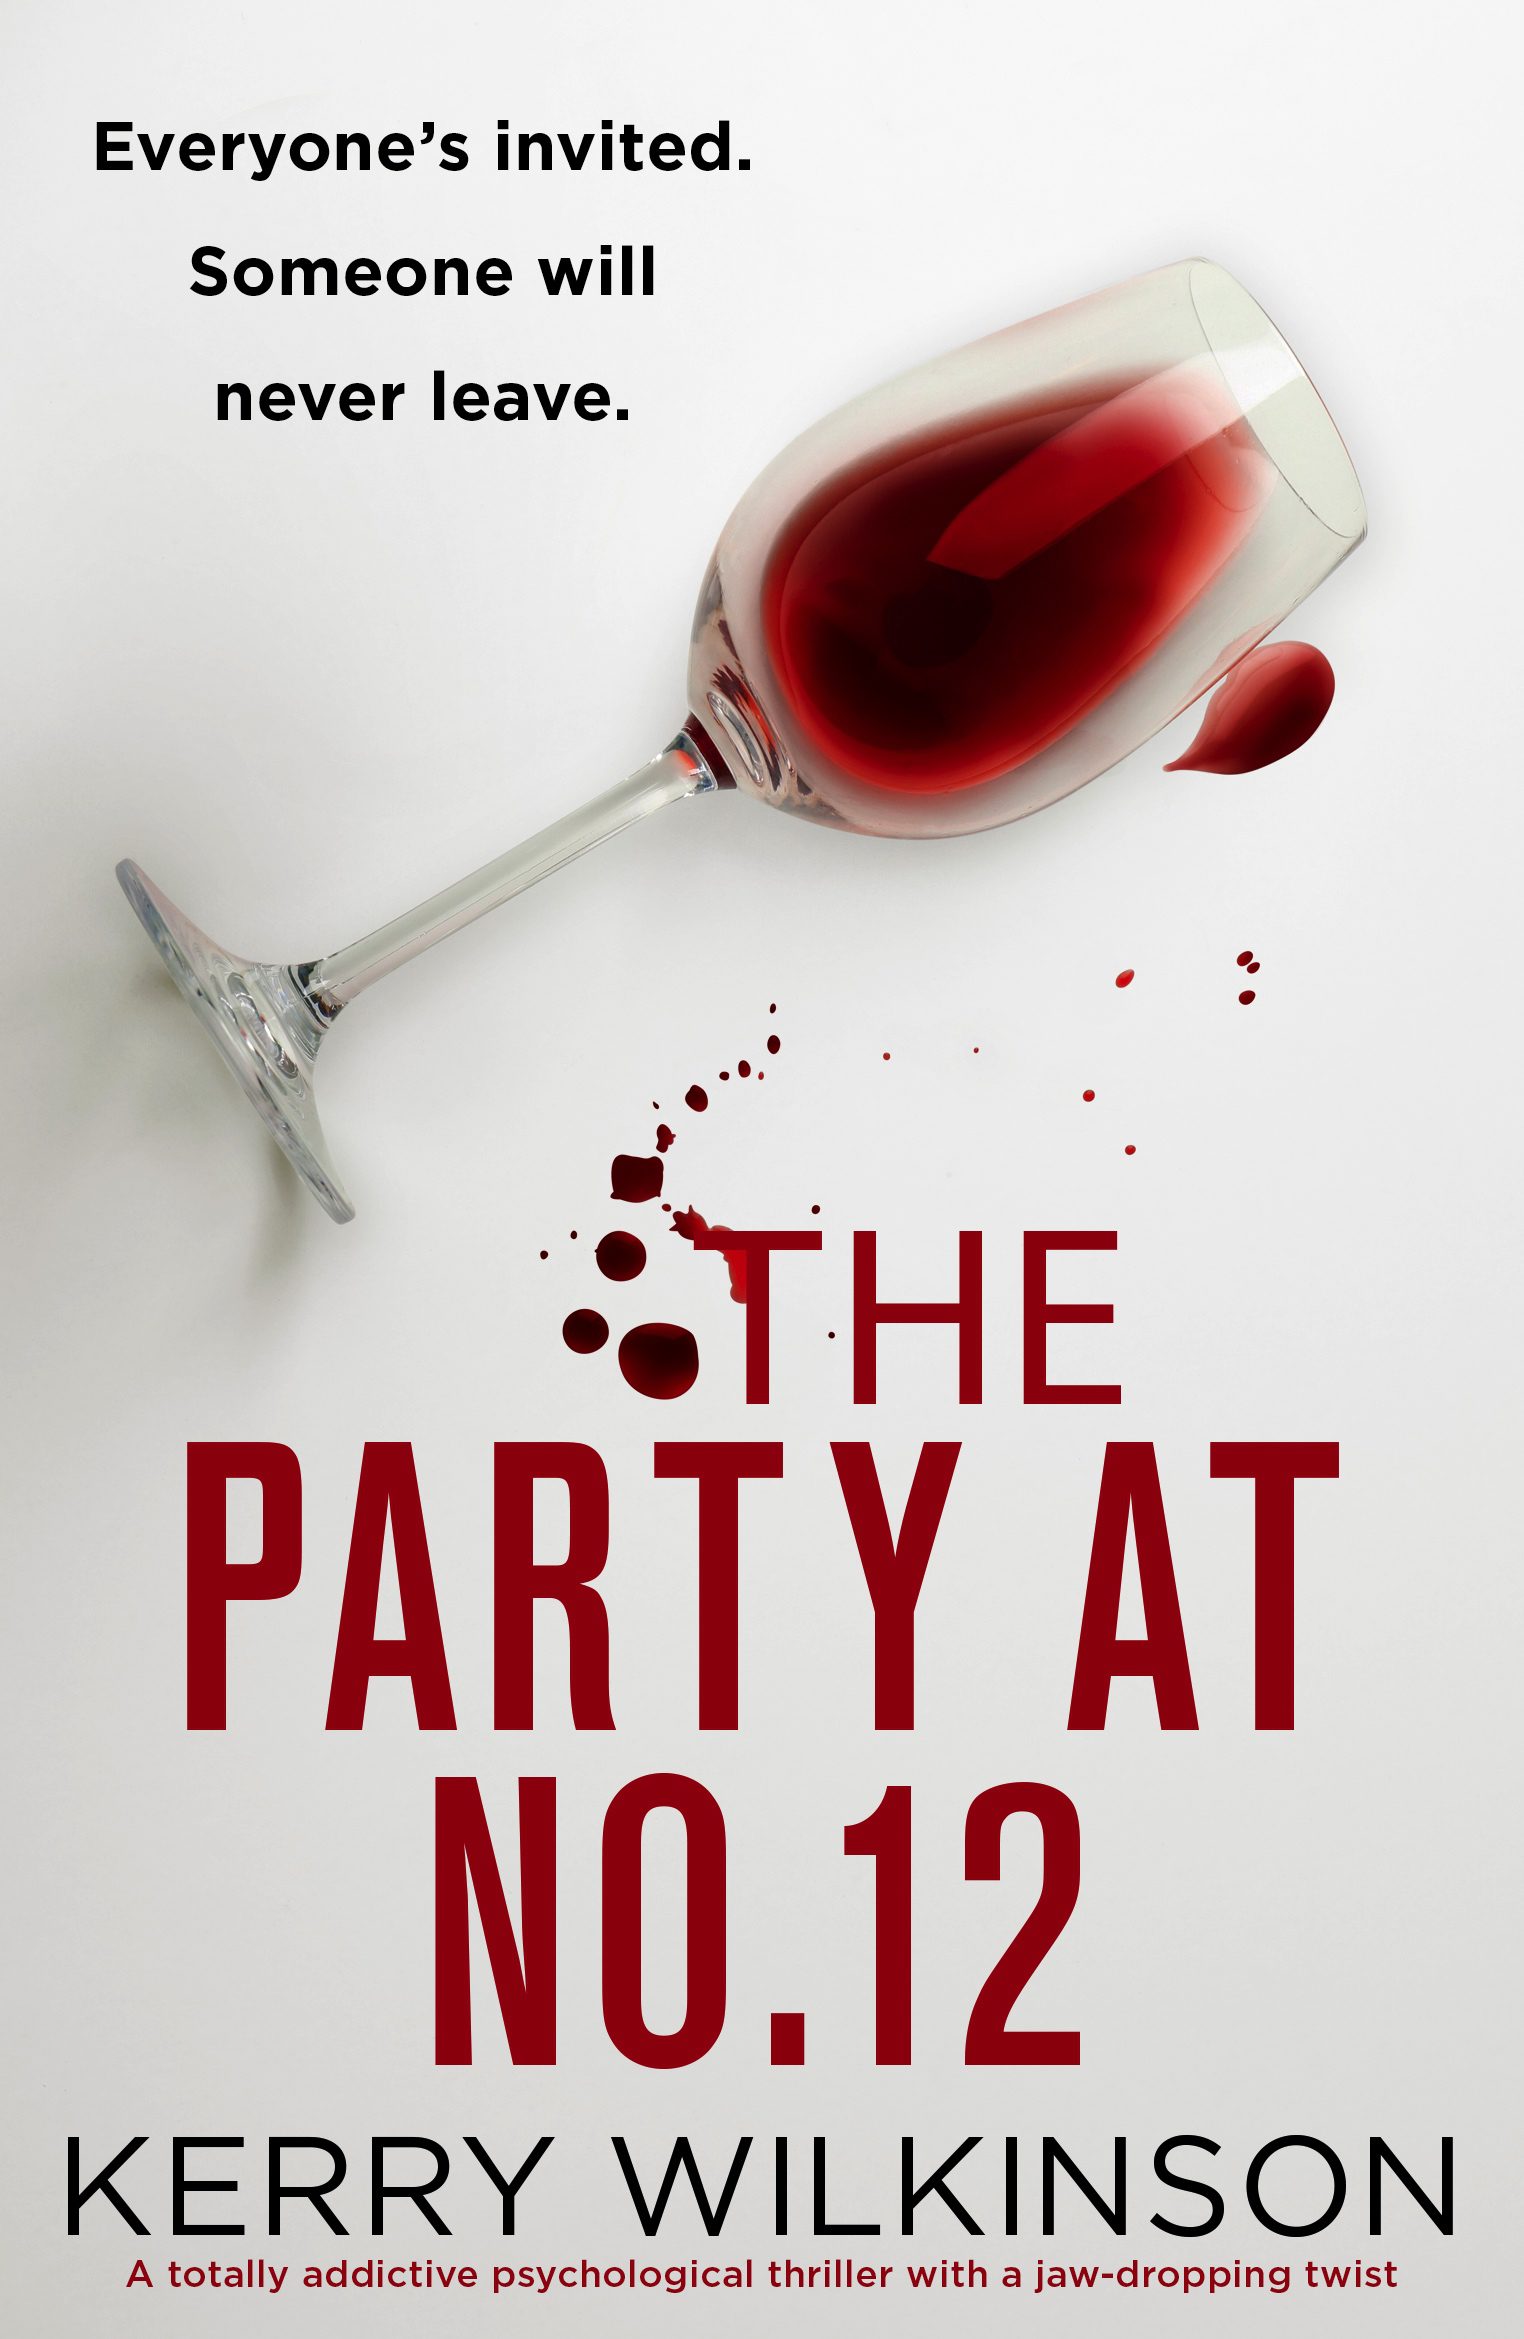 The Party at No. 12 book cover